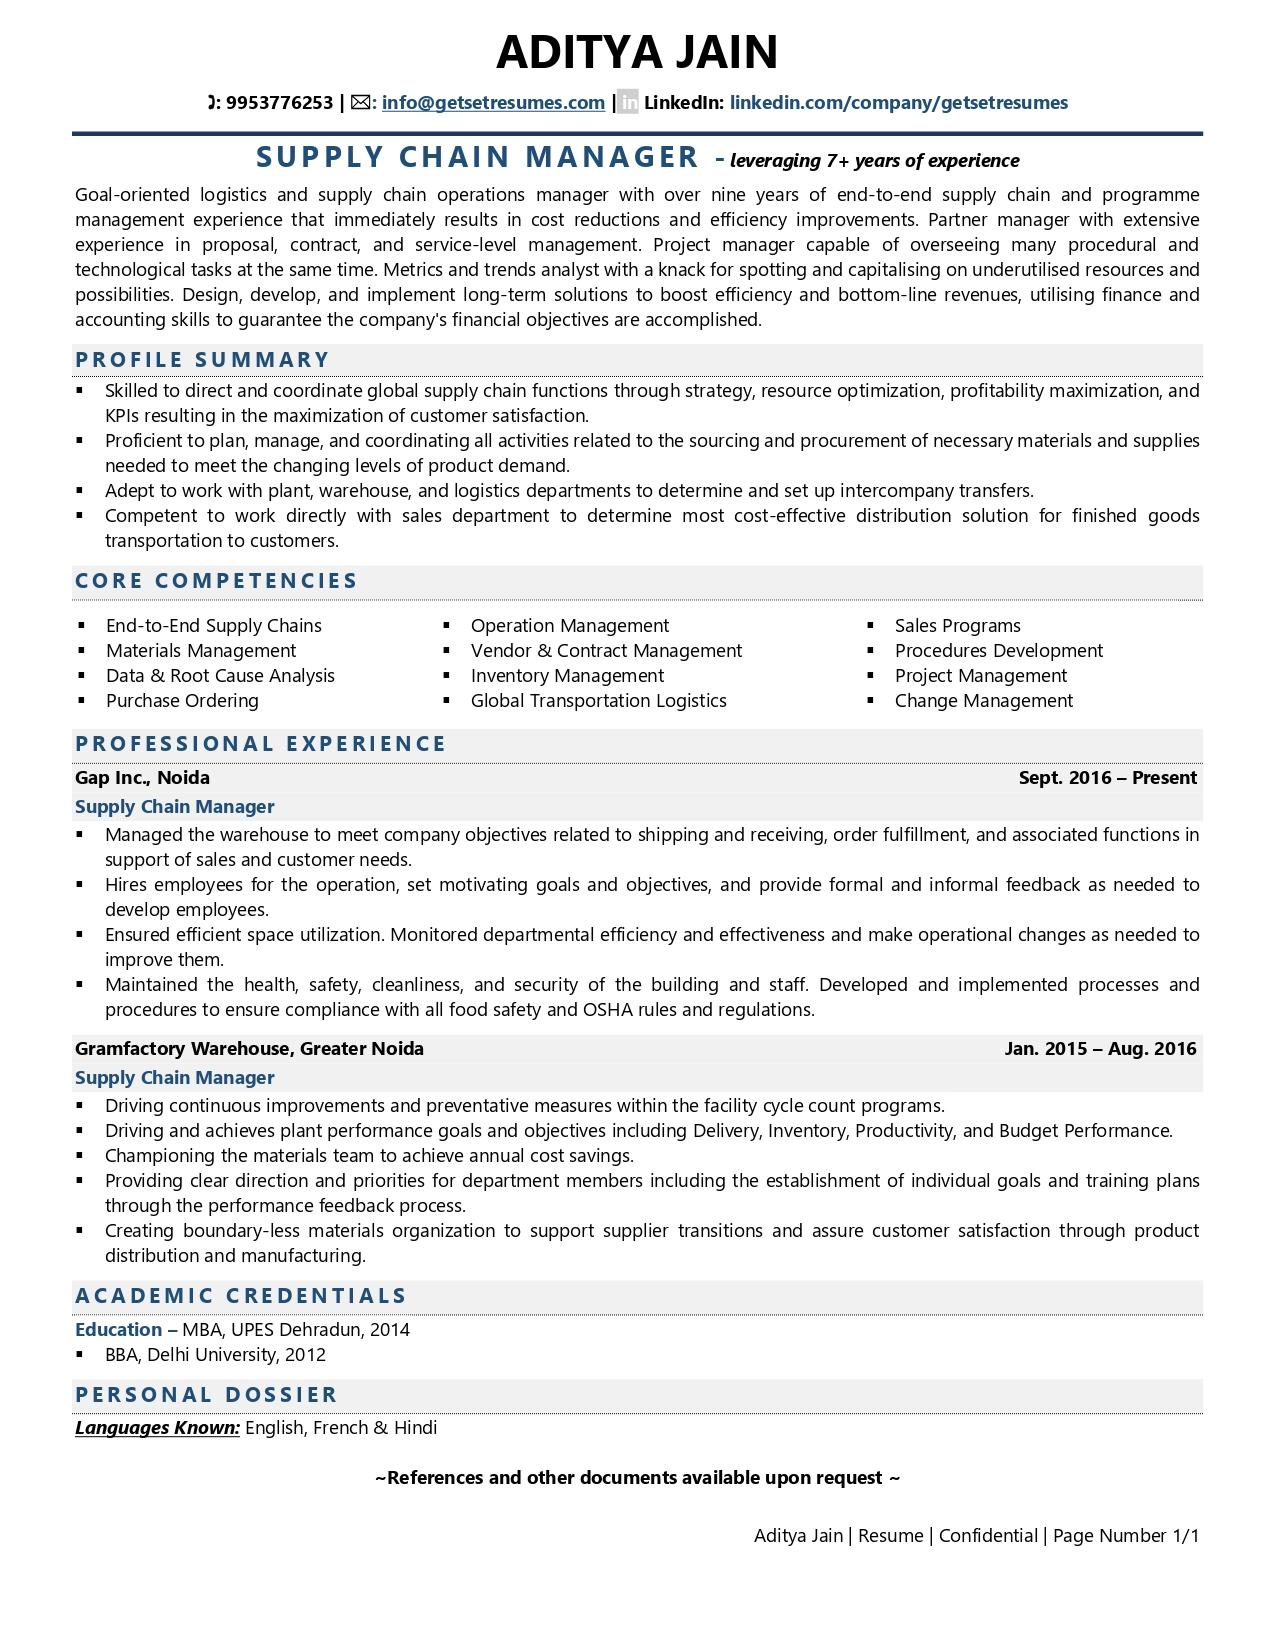 supply chain management resume examples